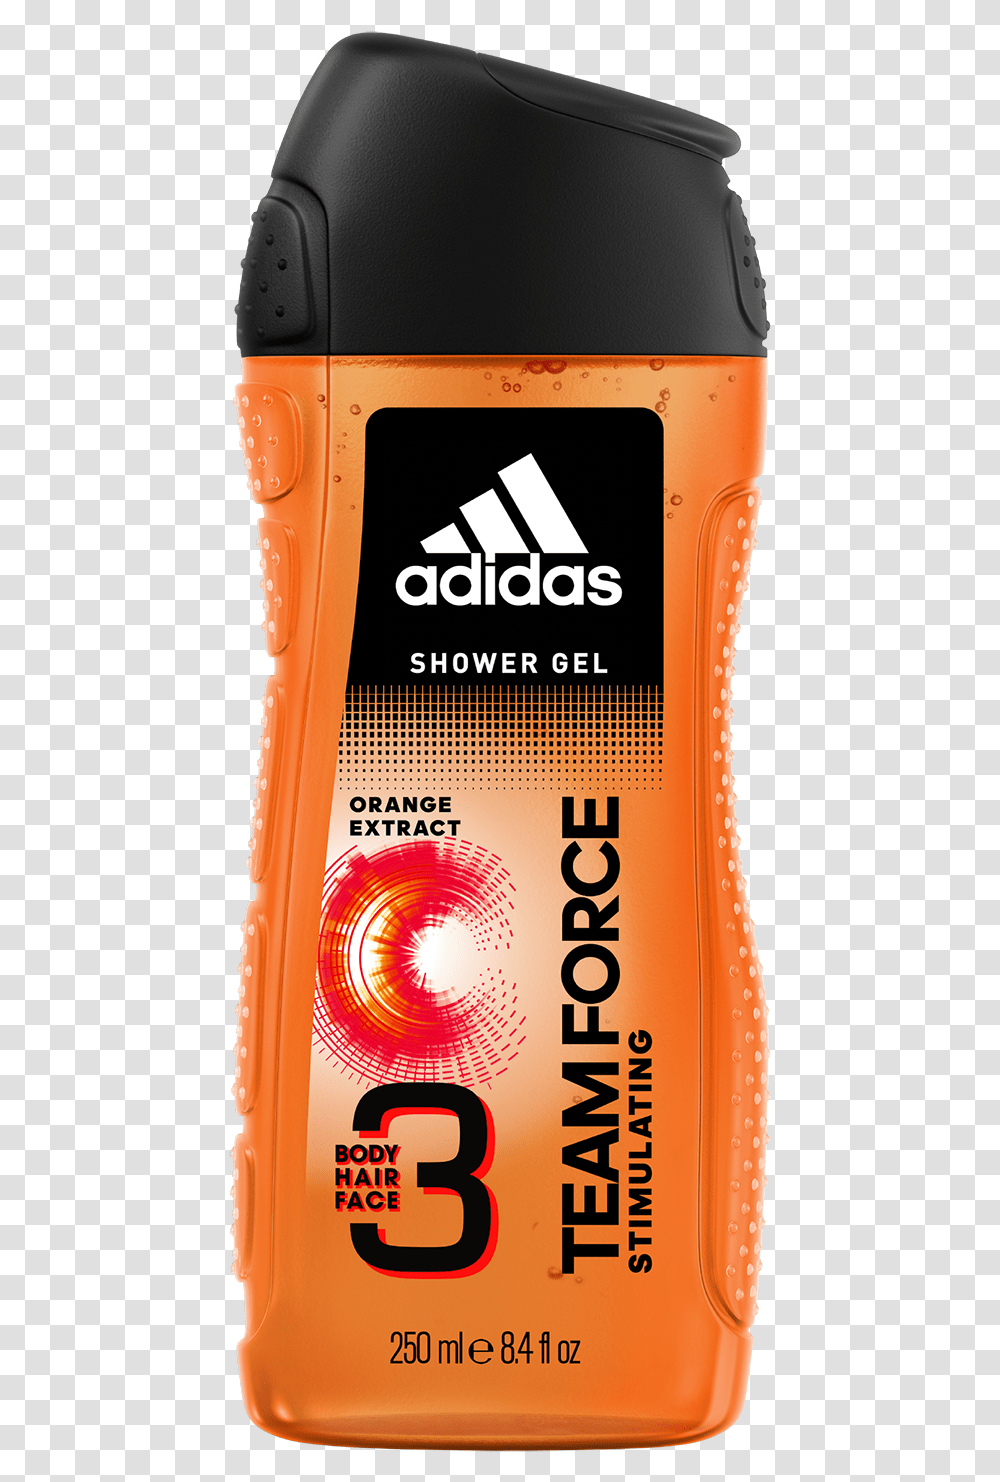 Team Force 3in1 Body Hair And Face Shower Gel For Adidas Shower Gel, Mobile Phone, Electronics, Cell Phone, Poster Transparent Png